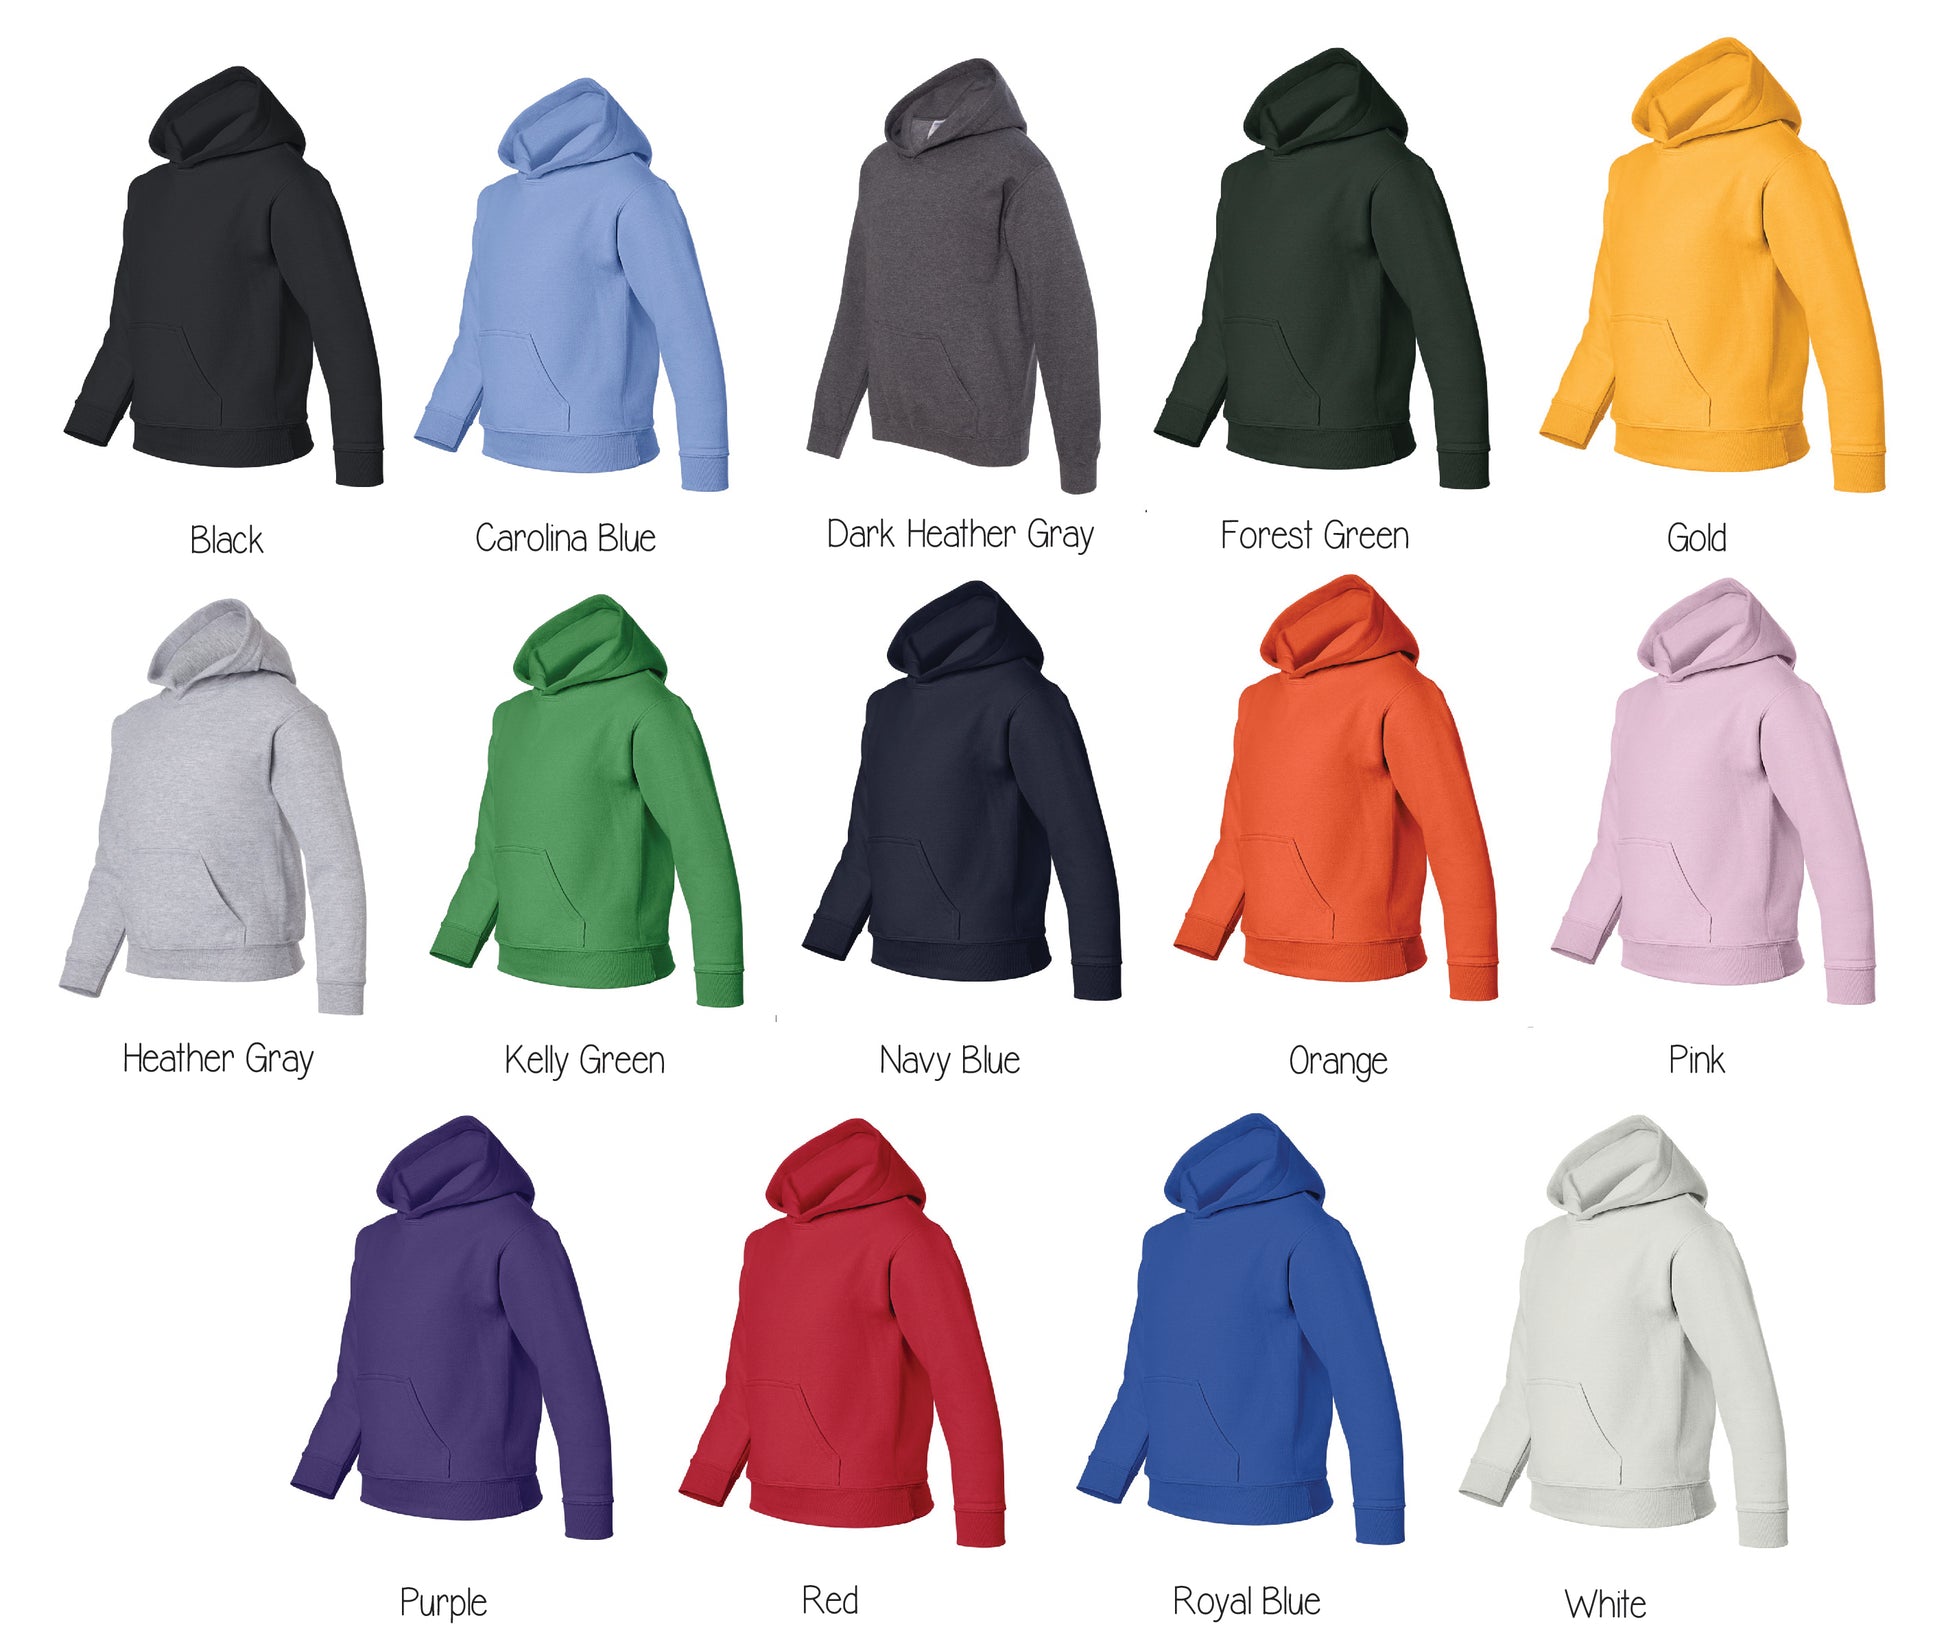 Colors for regular hoodie and crewneck